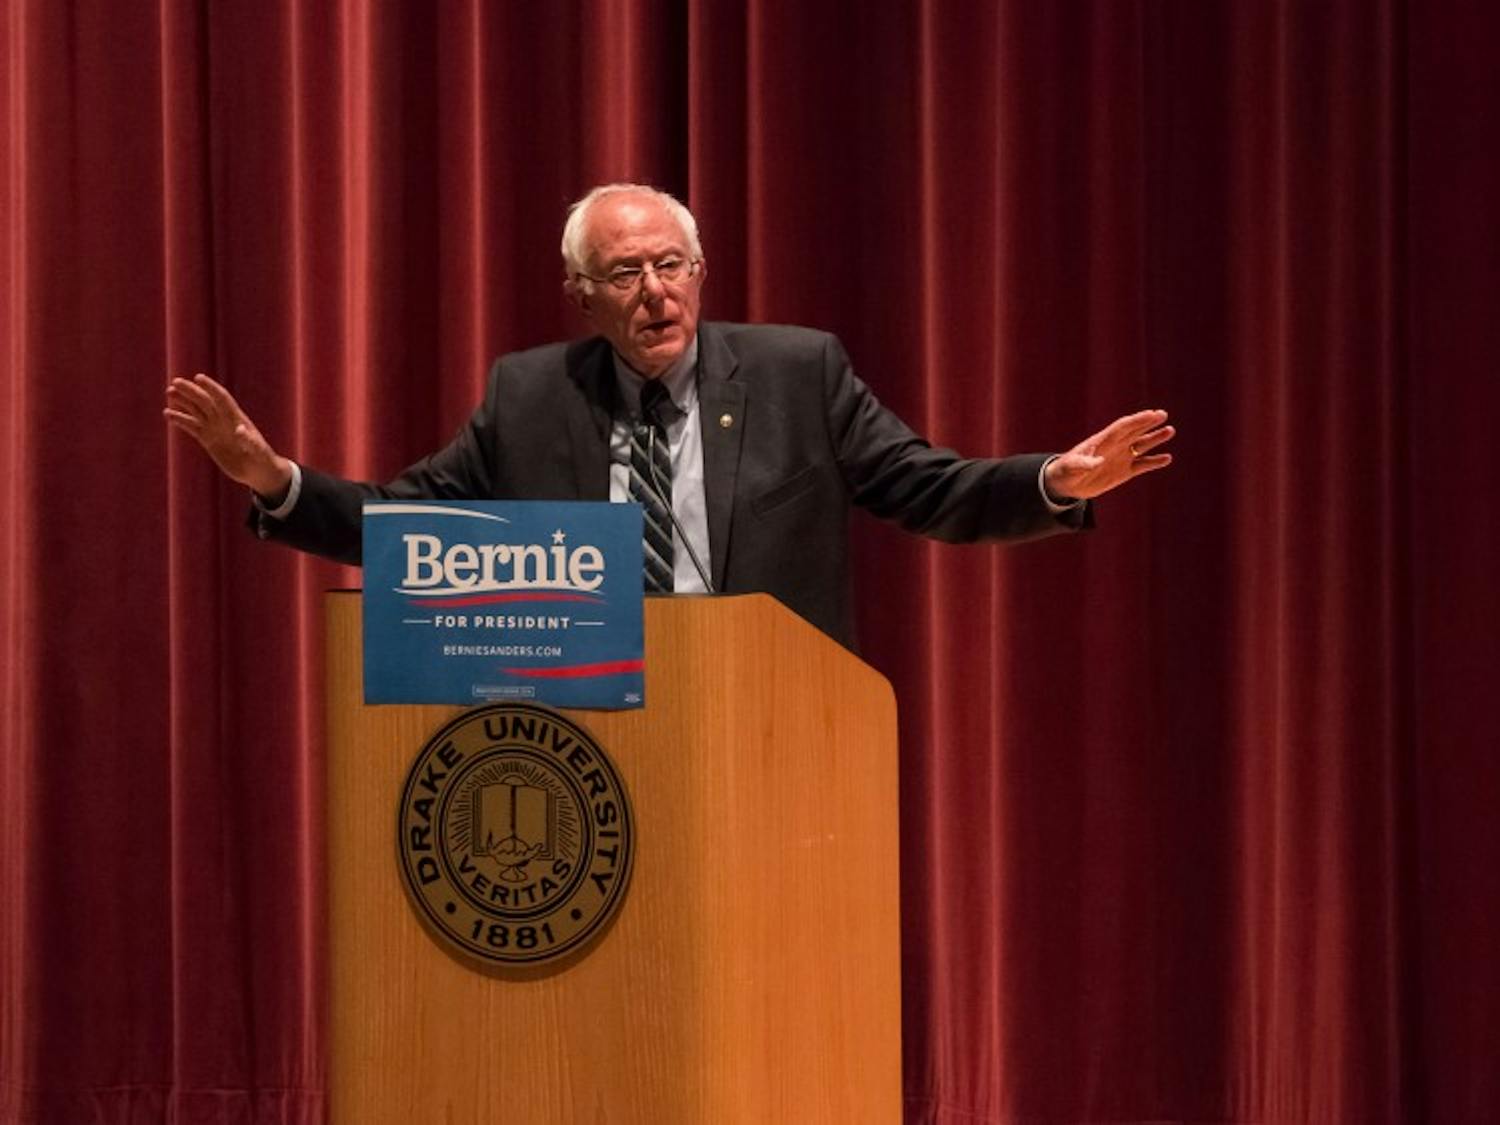 Vermont Senator Bernie Sanders is running for president as a Democratic candidate for the 2016 election.  This summer he is giving speeches in places like Drake University in Des Moines.  Next February, Iowans will caucus for presidential candidates before any other state in the country holds a primary. 6/12/2015 Photo by John Pemble